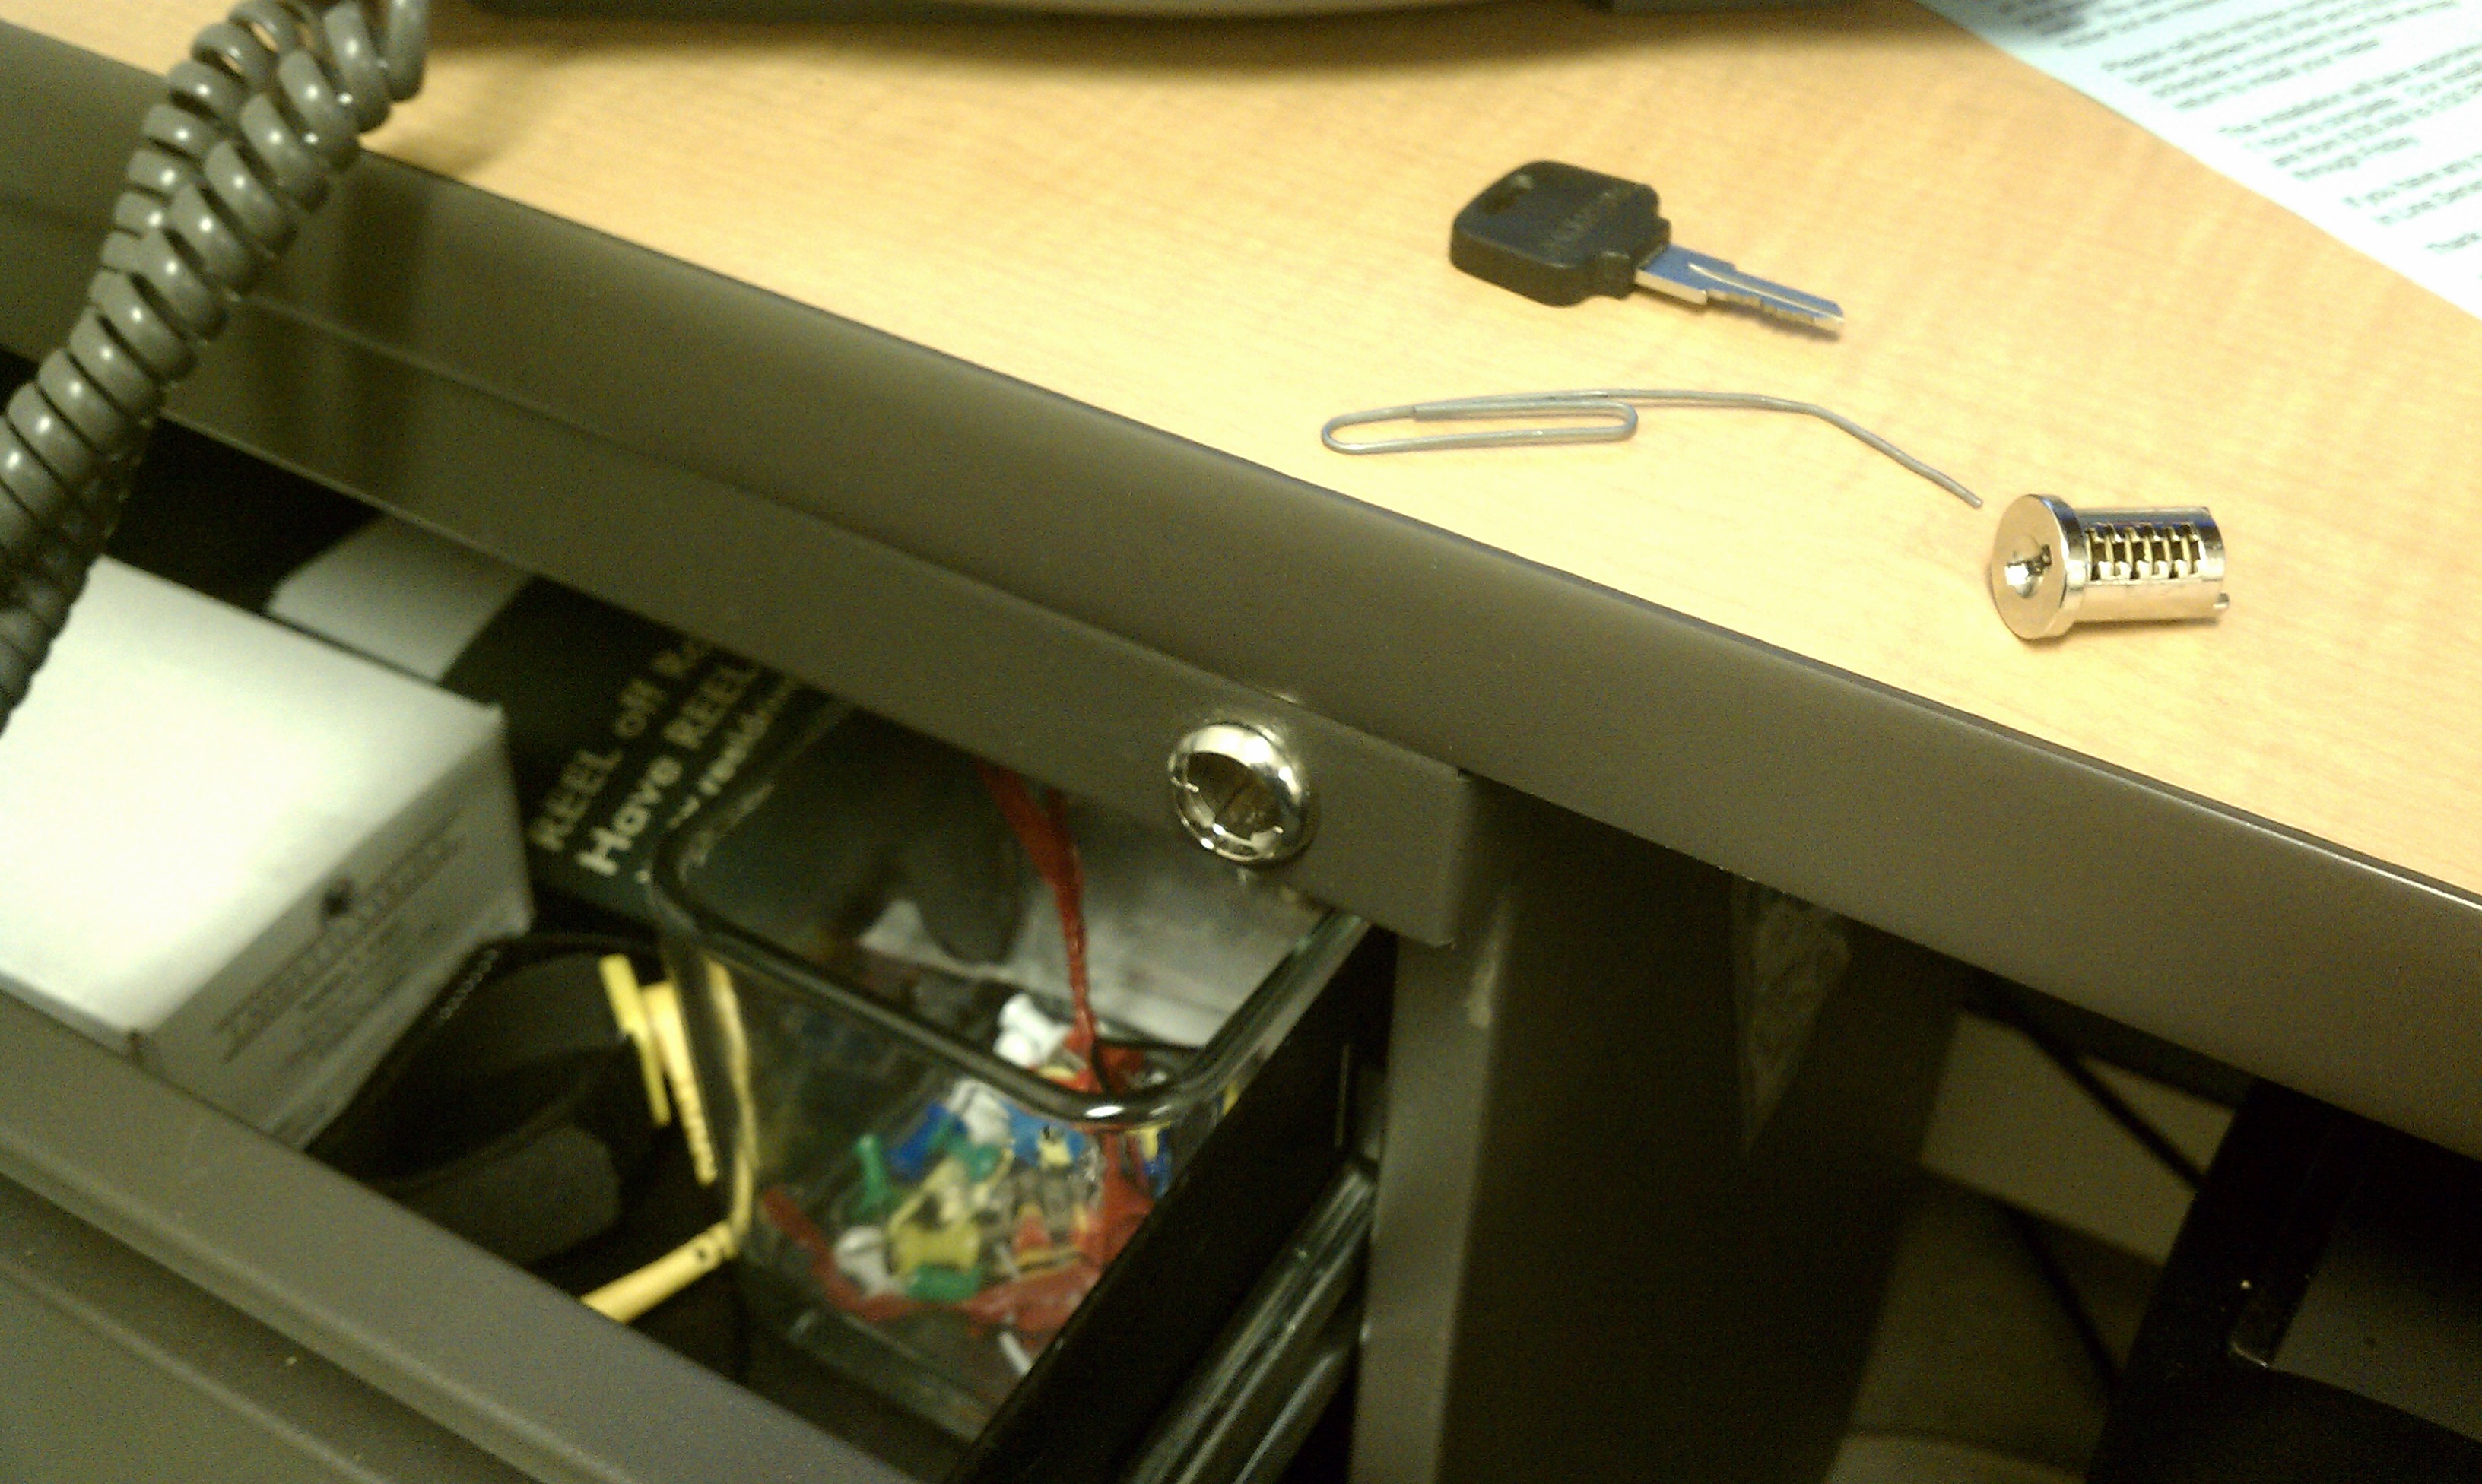 Dismantling a desk drawer lock with a paper clip. Undrblog